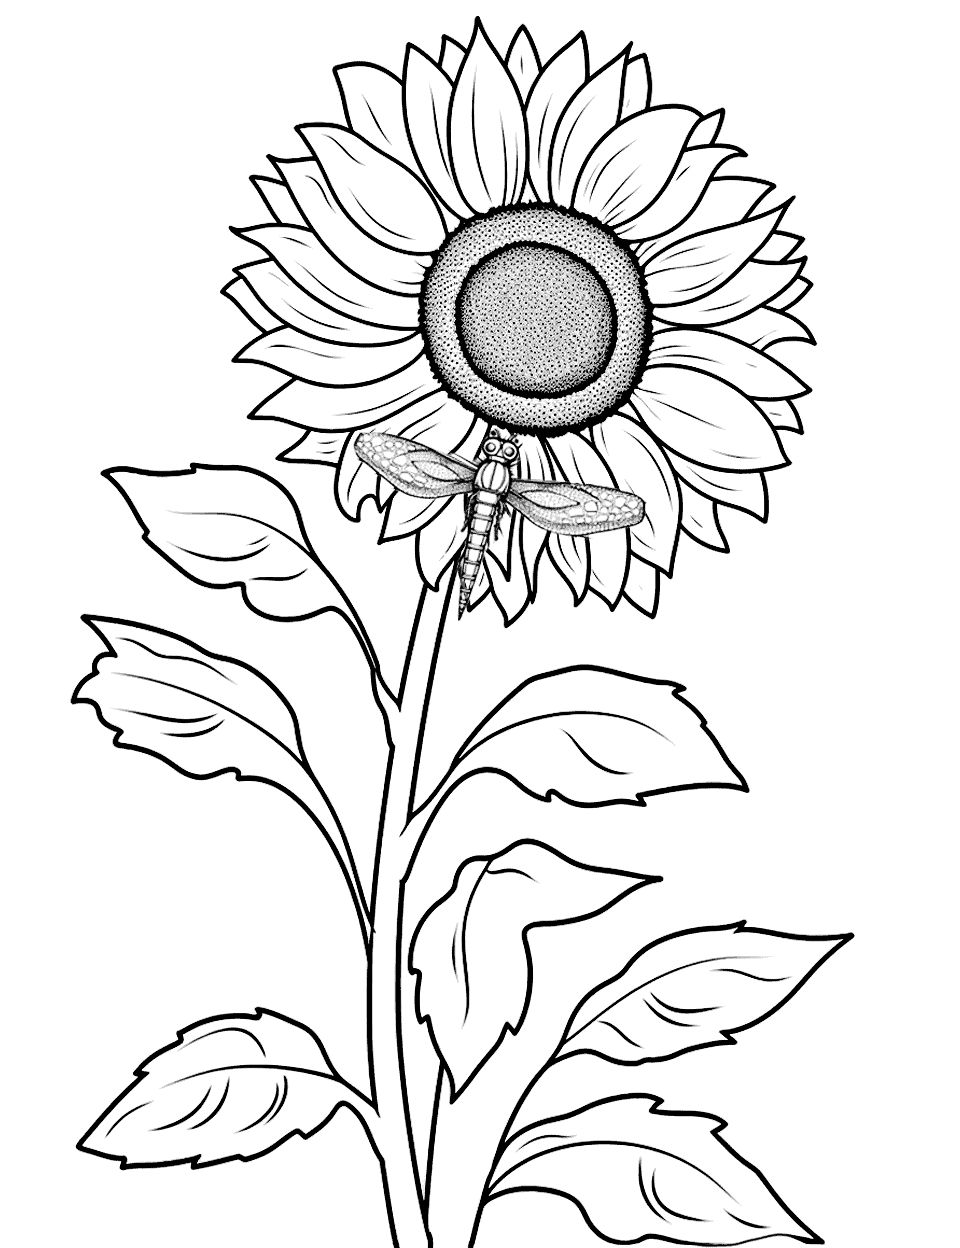 Dragonfly On a Sunflower Coloring Page - A dragonfly hovering on the head of a sunflower.